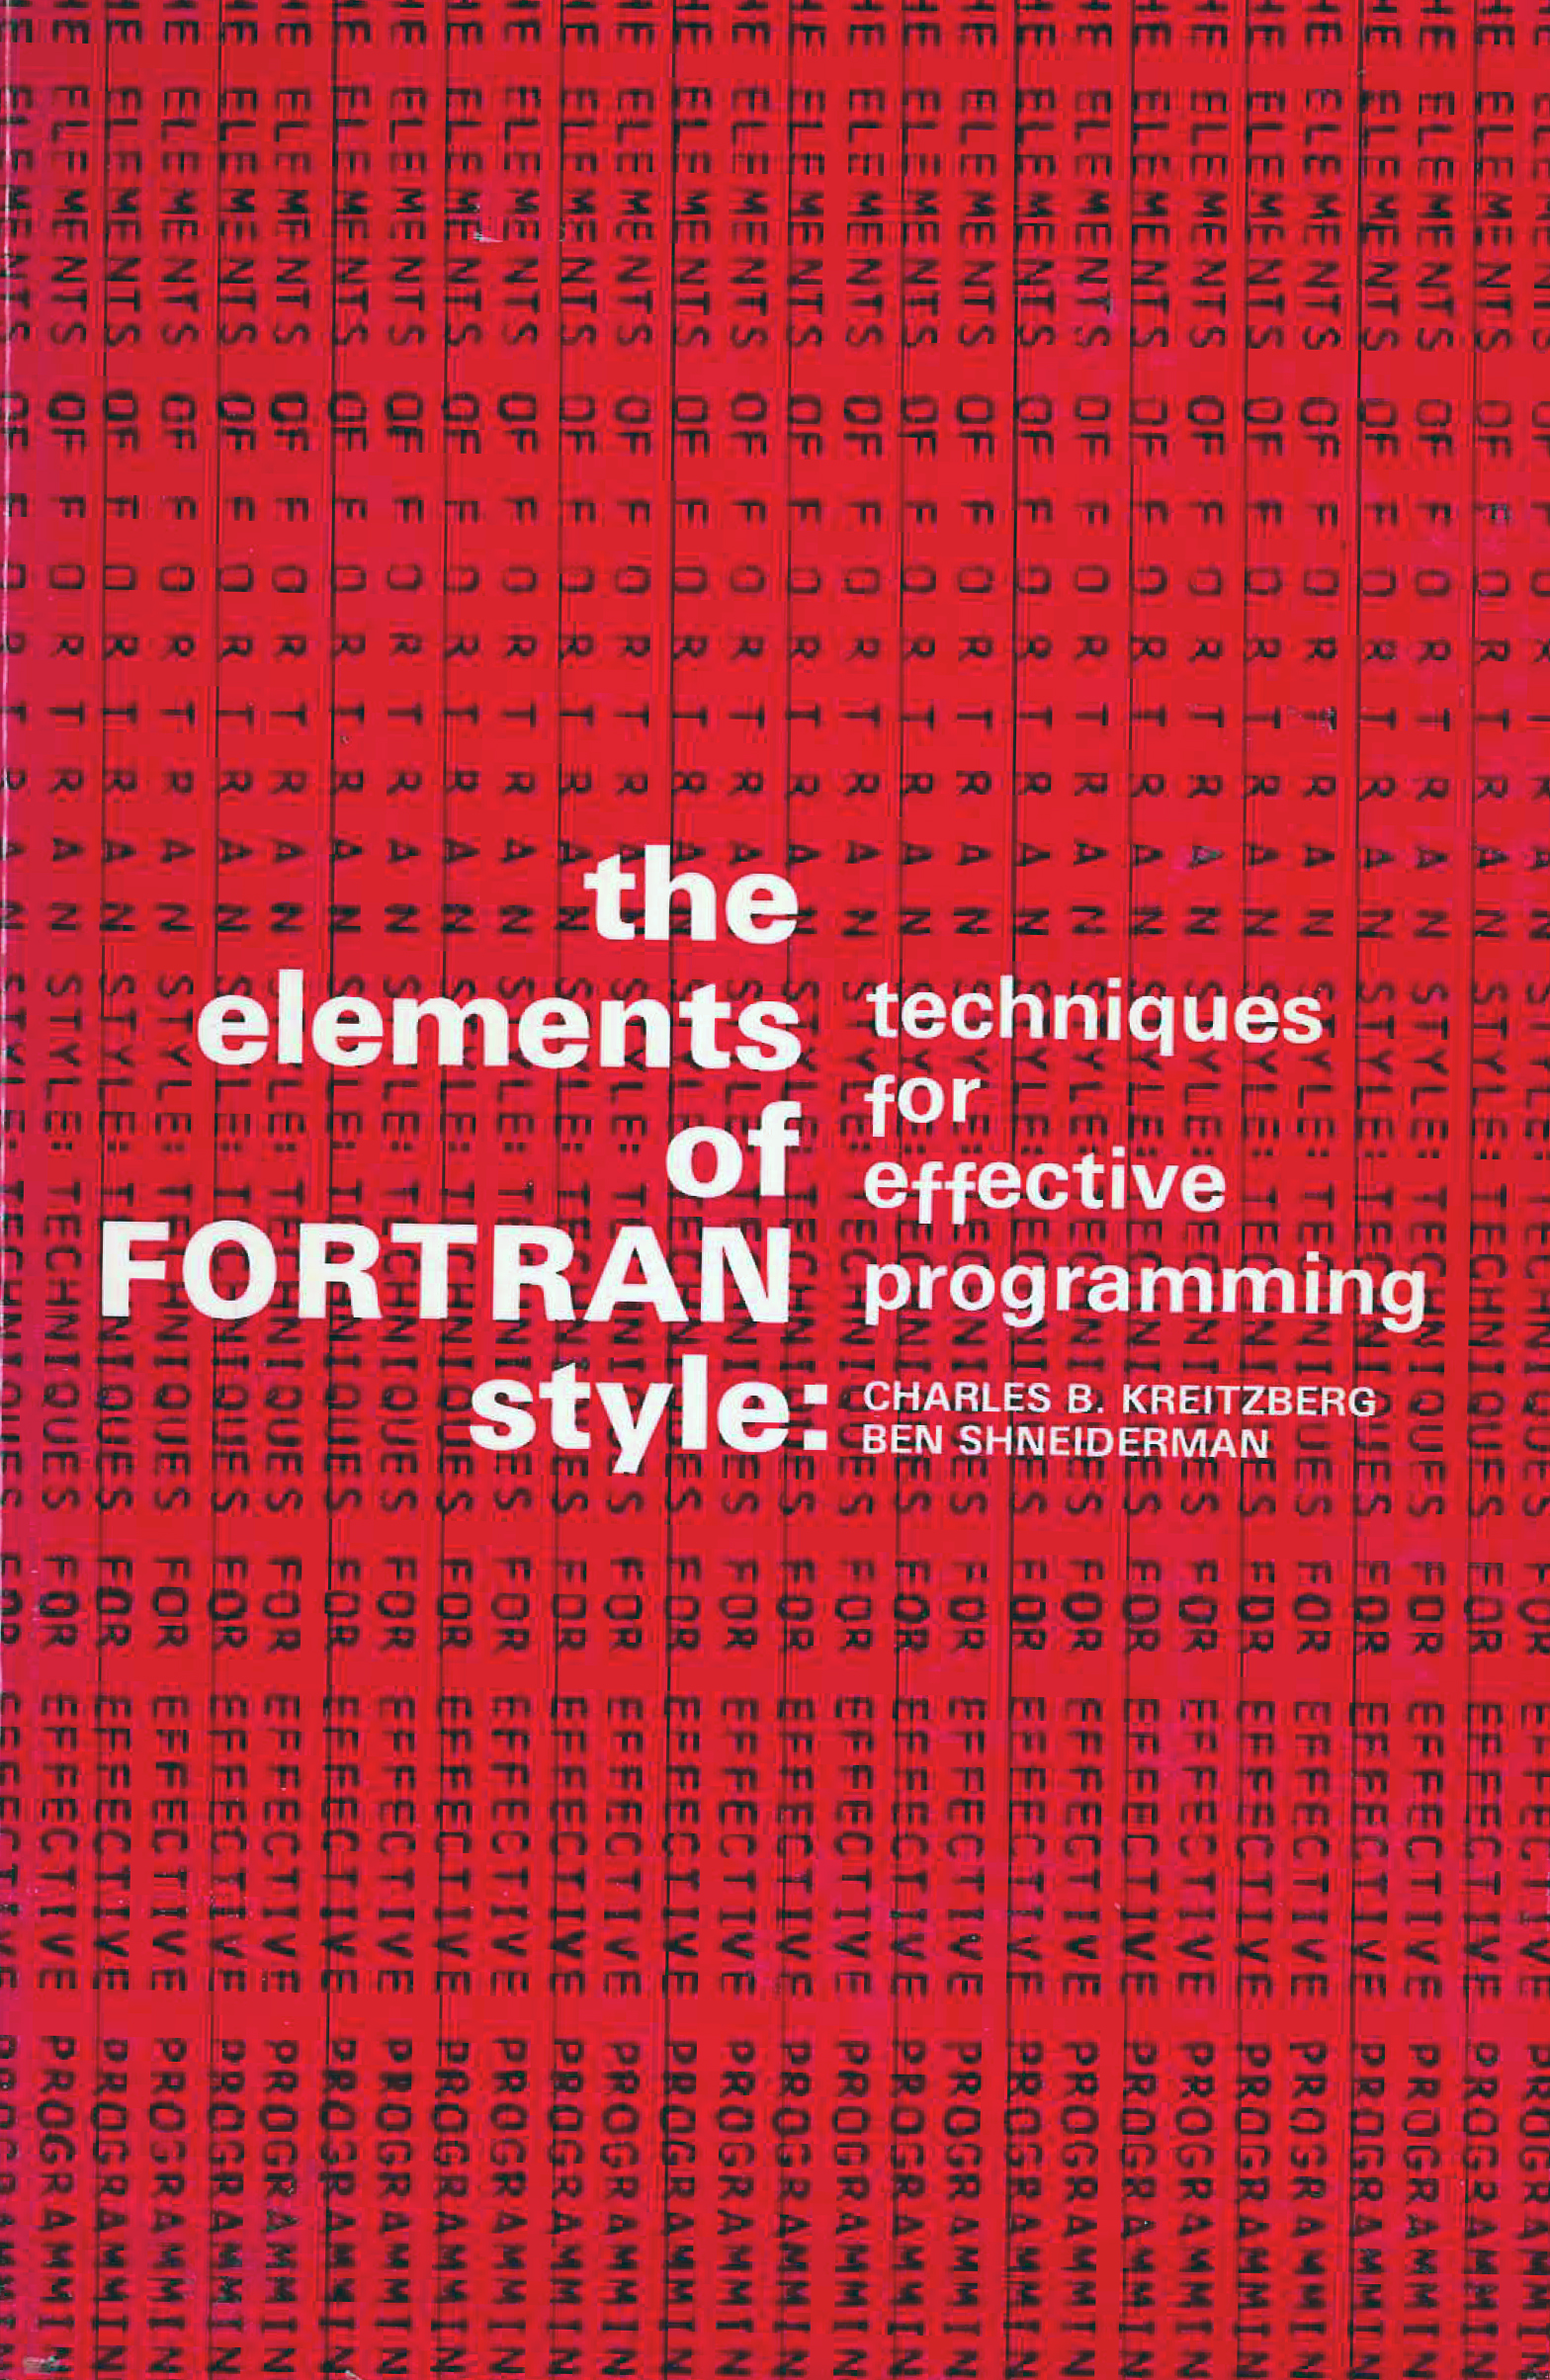 Elements of FORTRAN Style: Techniques for Effective Programming